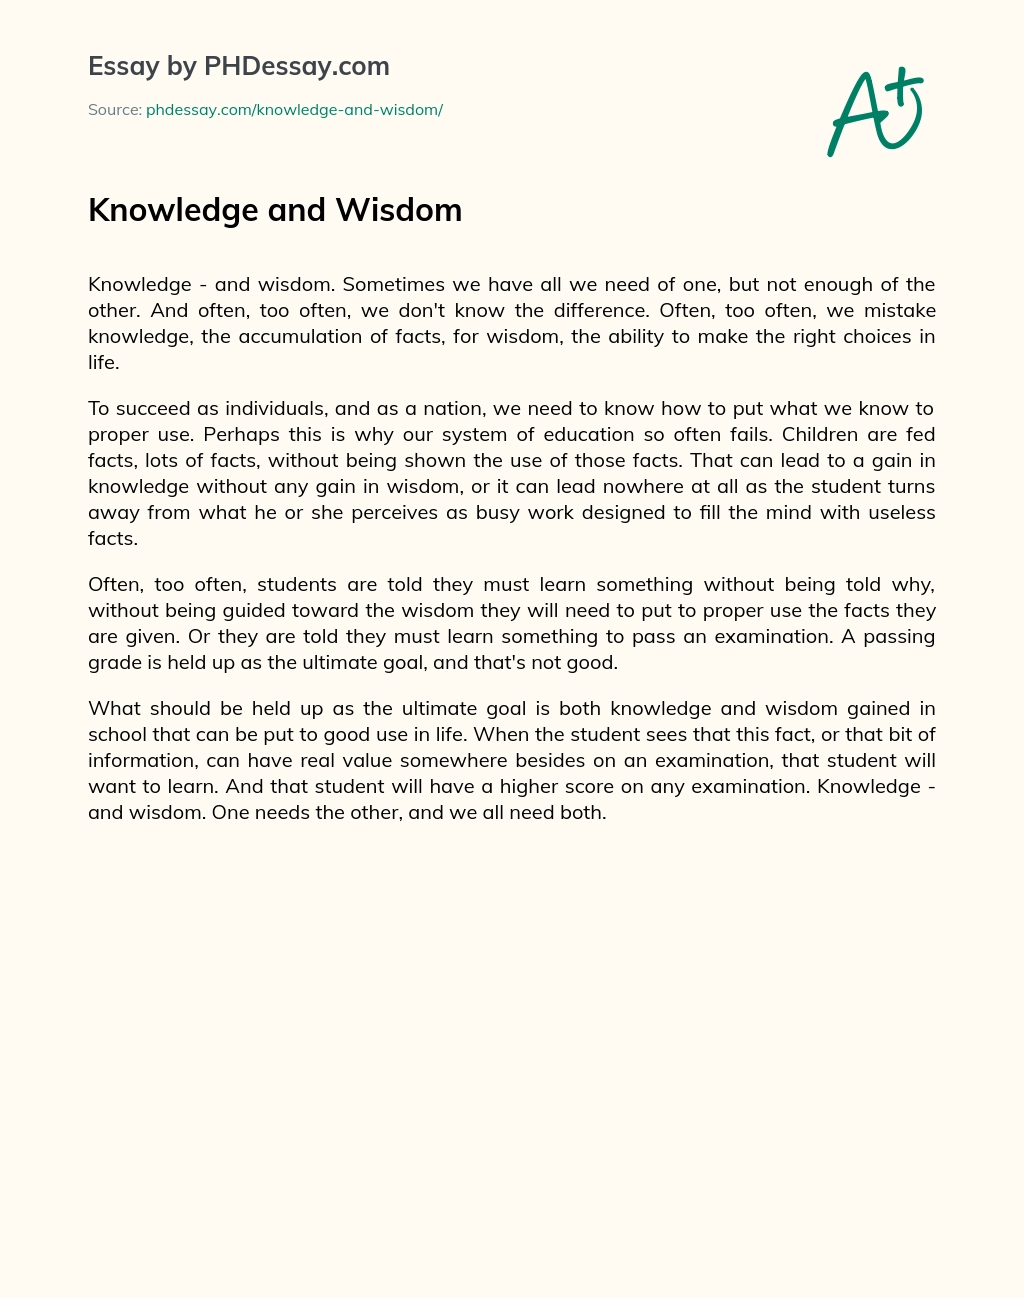 essay about wisdom and knowledge